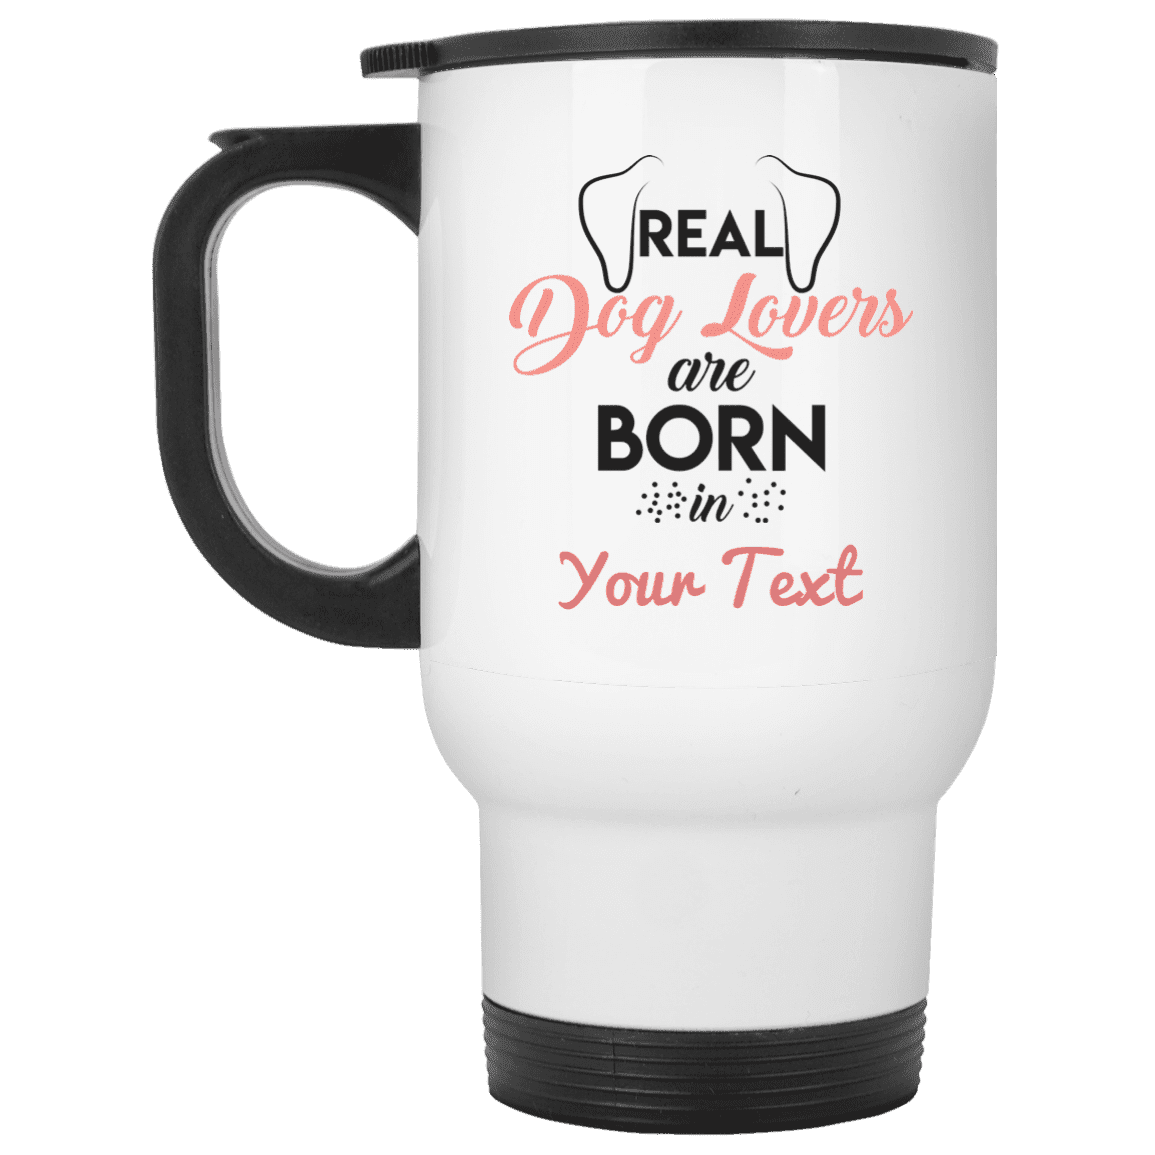 Personalized Real Dog Lovers - Mugs.